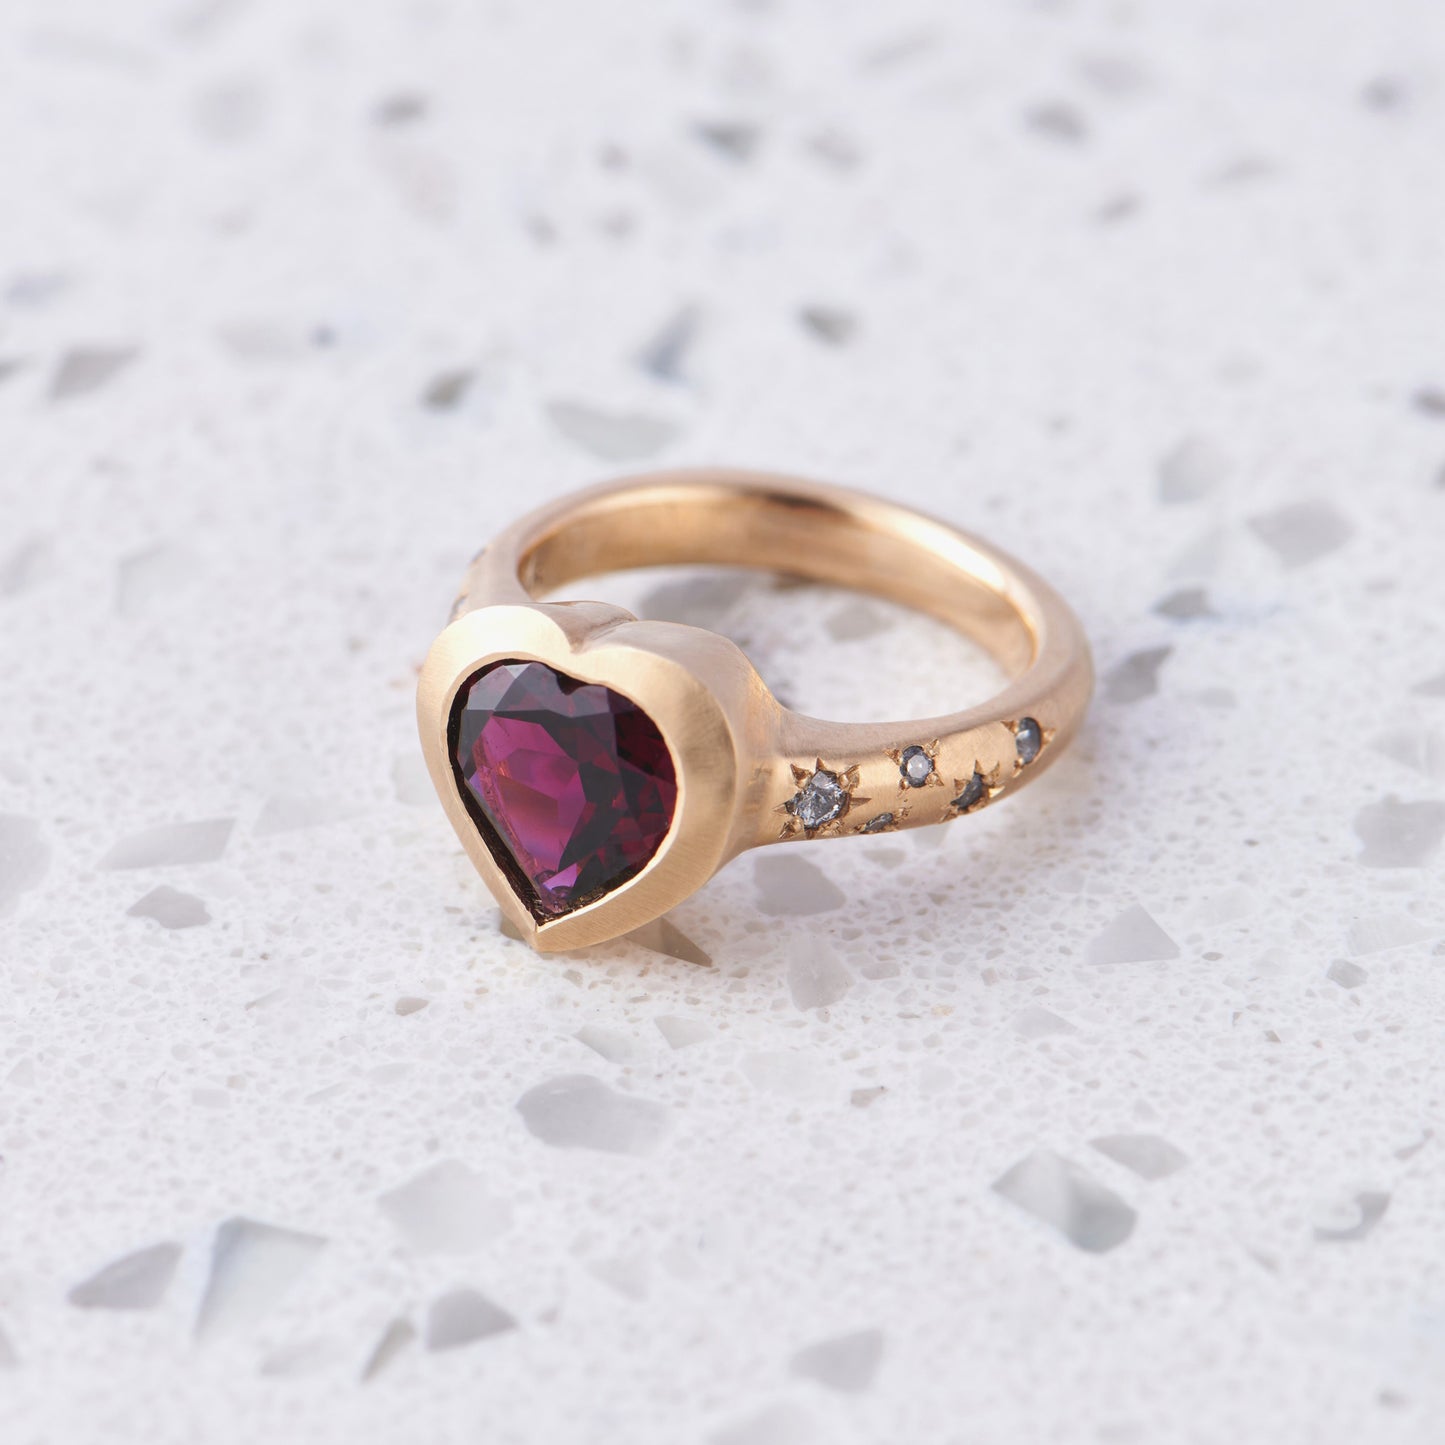 Heart Talisman Ring with a Rhodolite Garnet and Salt & Pepper Diamonds in 14ct Yellow Gold, Size M (In Stock)